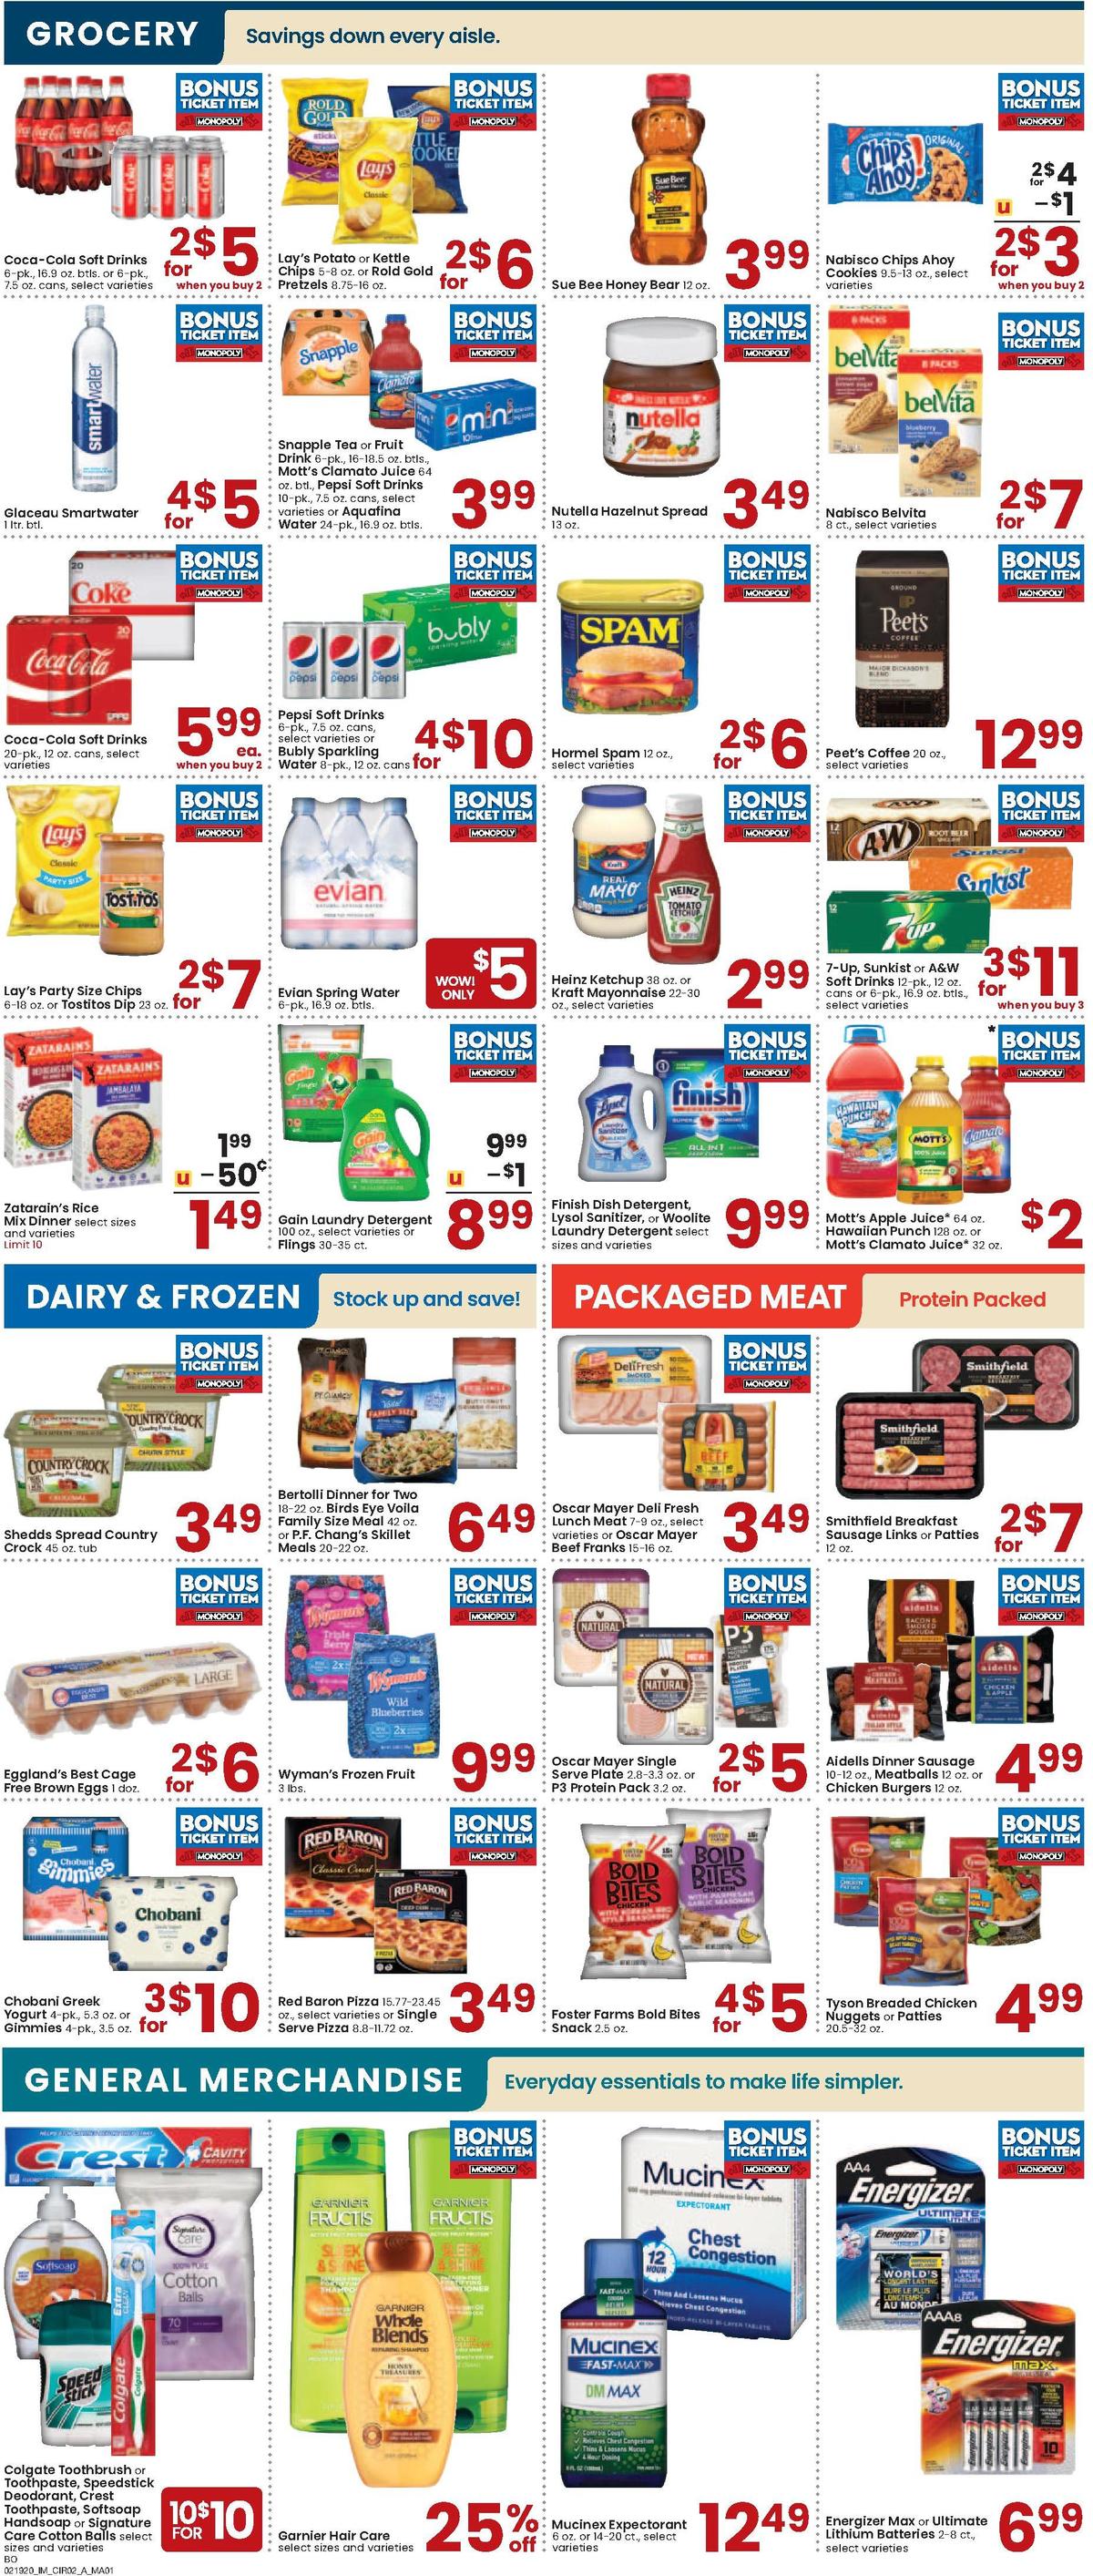 Albertsons Weekly Ad from February 19